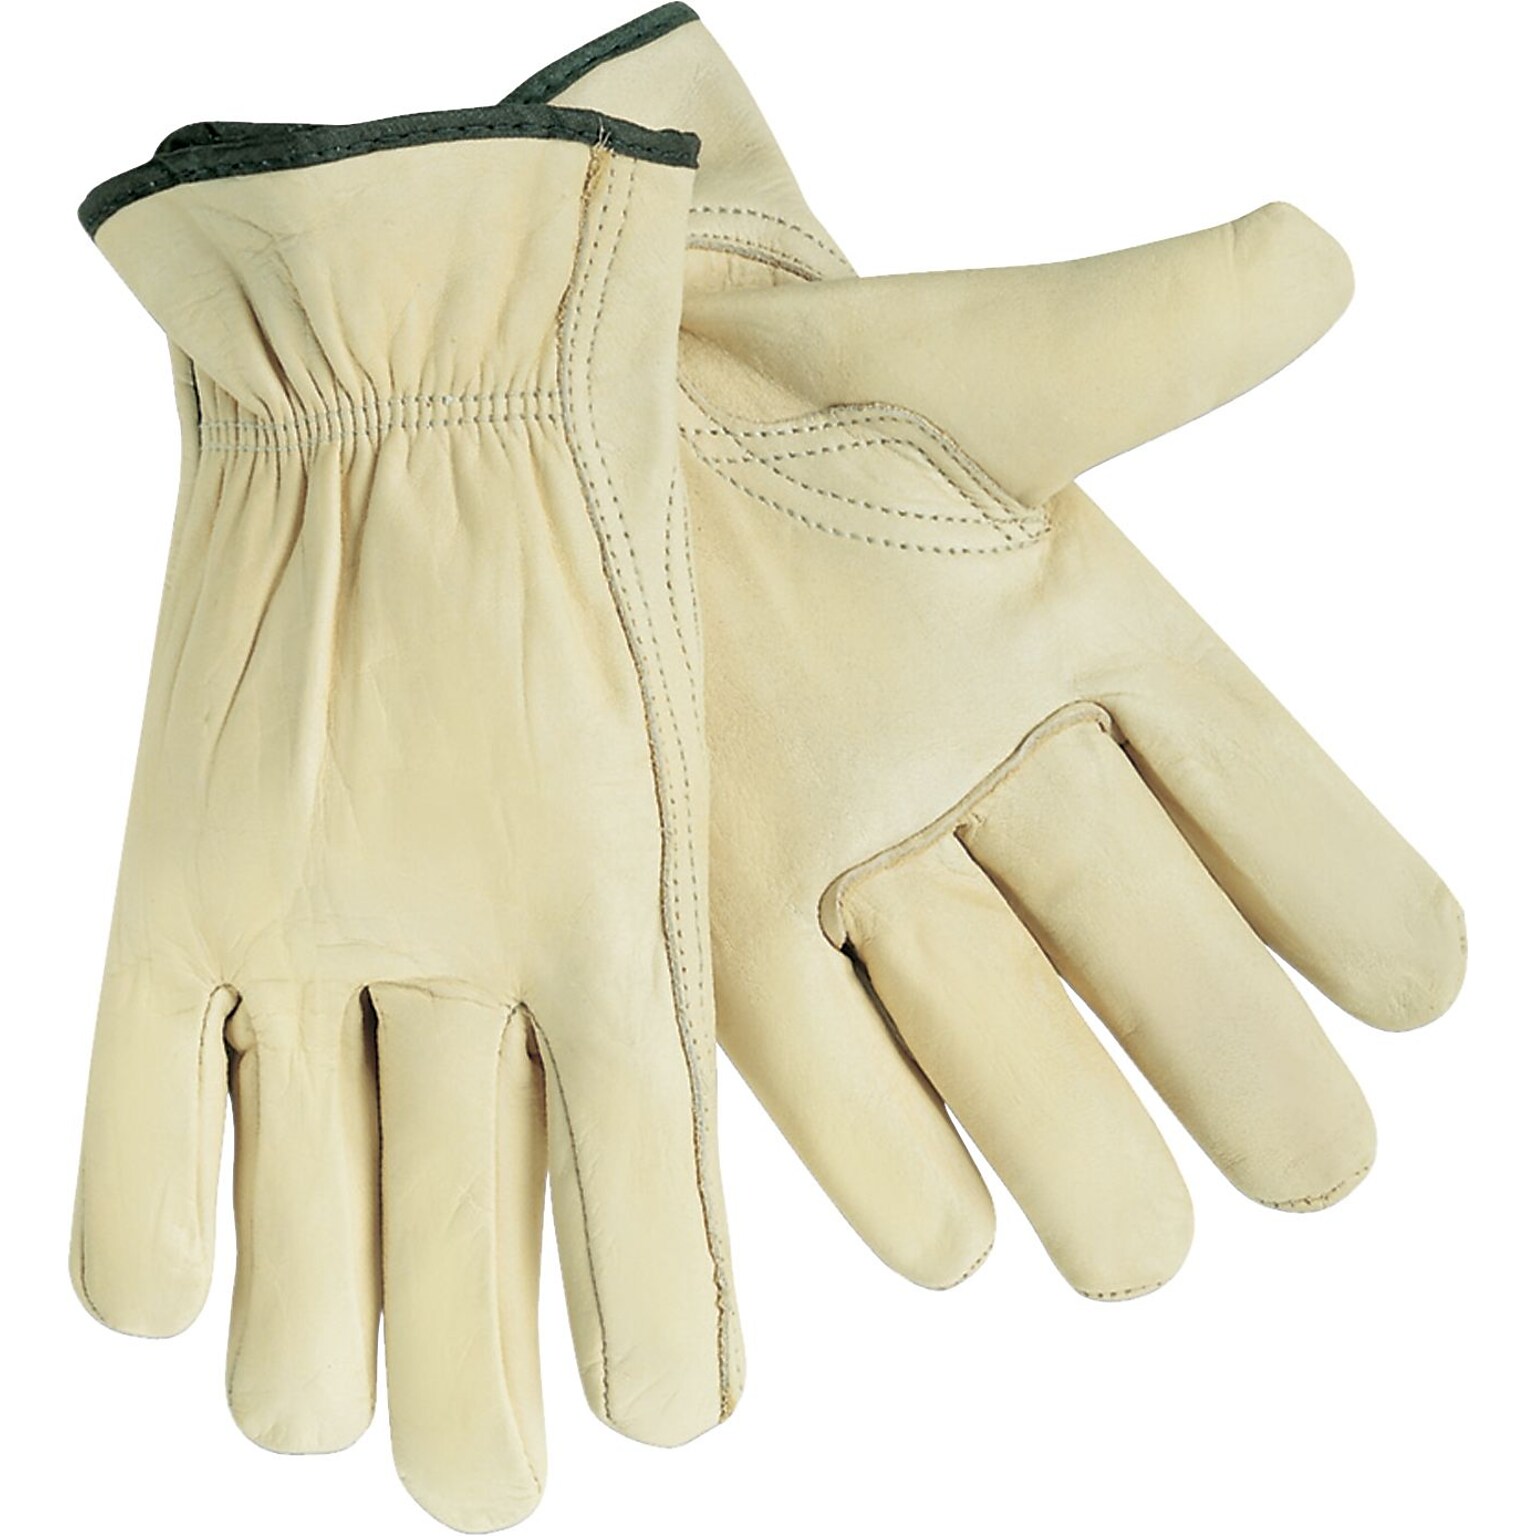 Memphis Gloves® Drivers Gloves, Cowhide Leather, Slip-On Cuff, XXL Size, Cream, 12 PRS